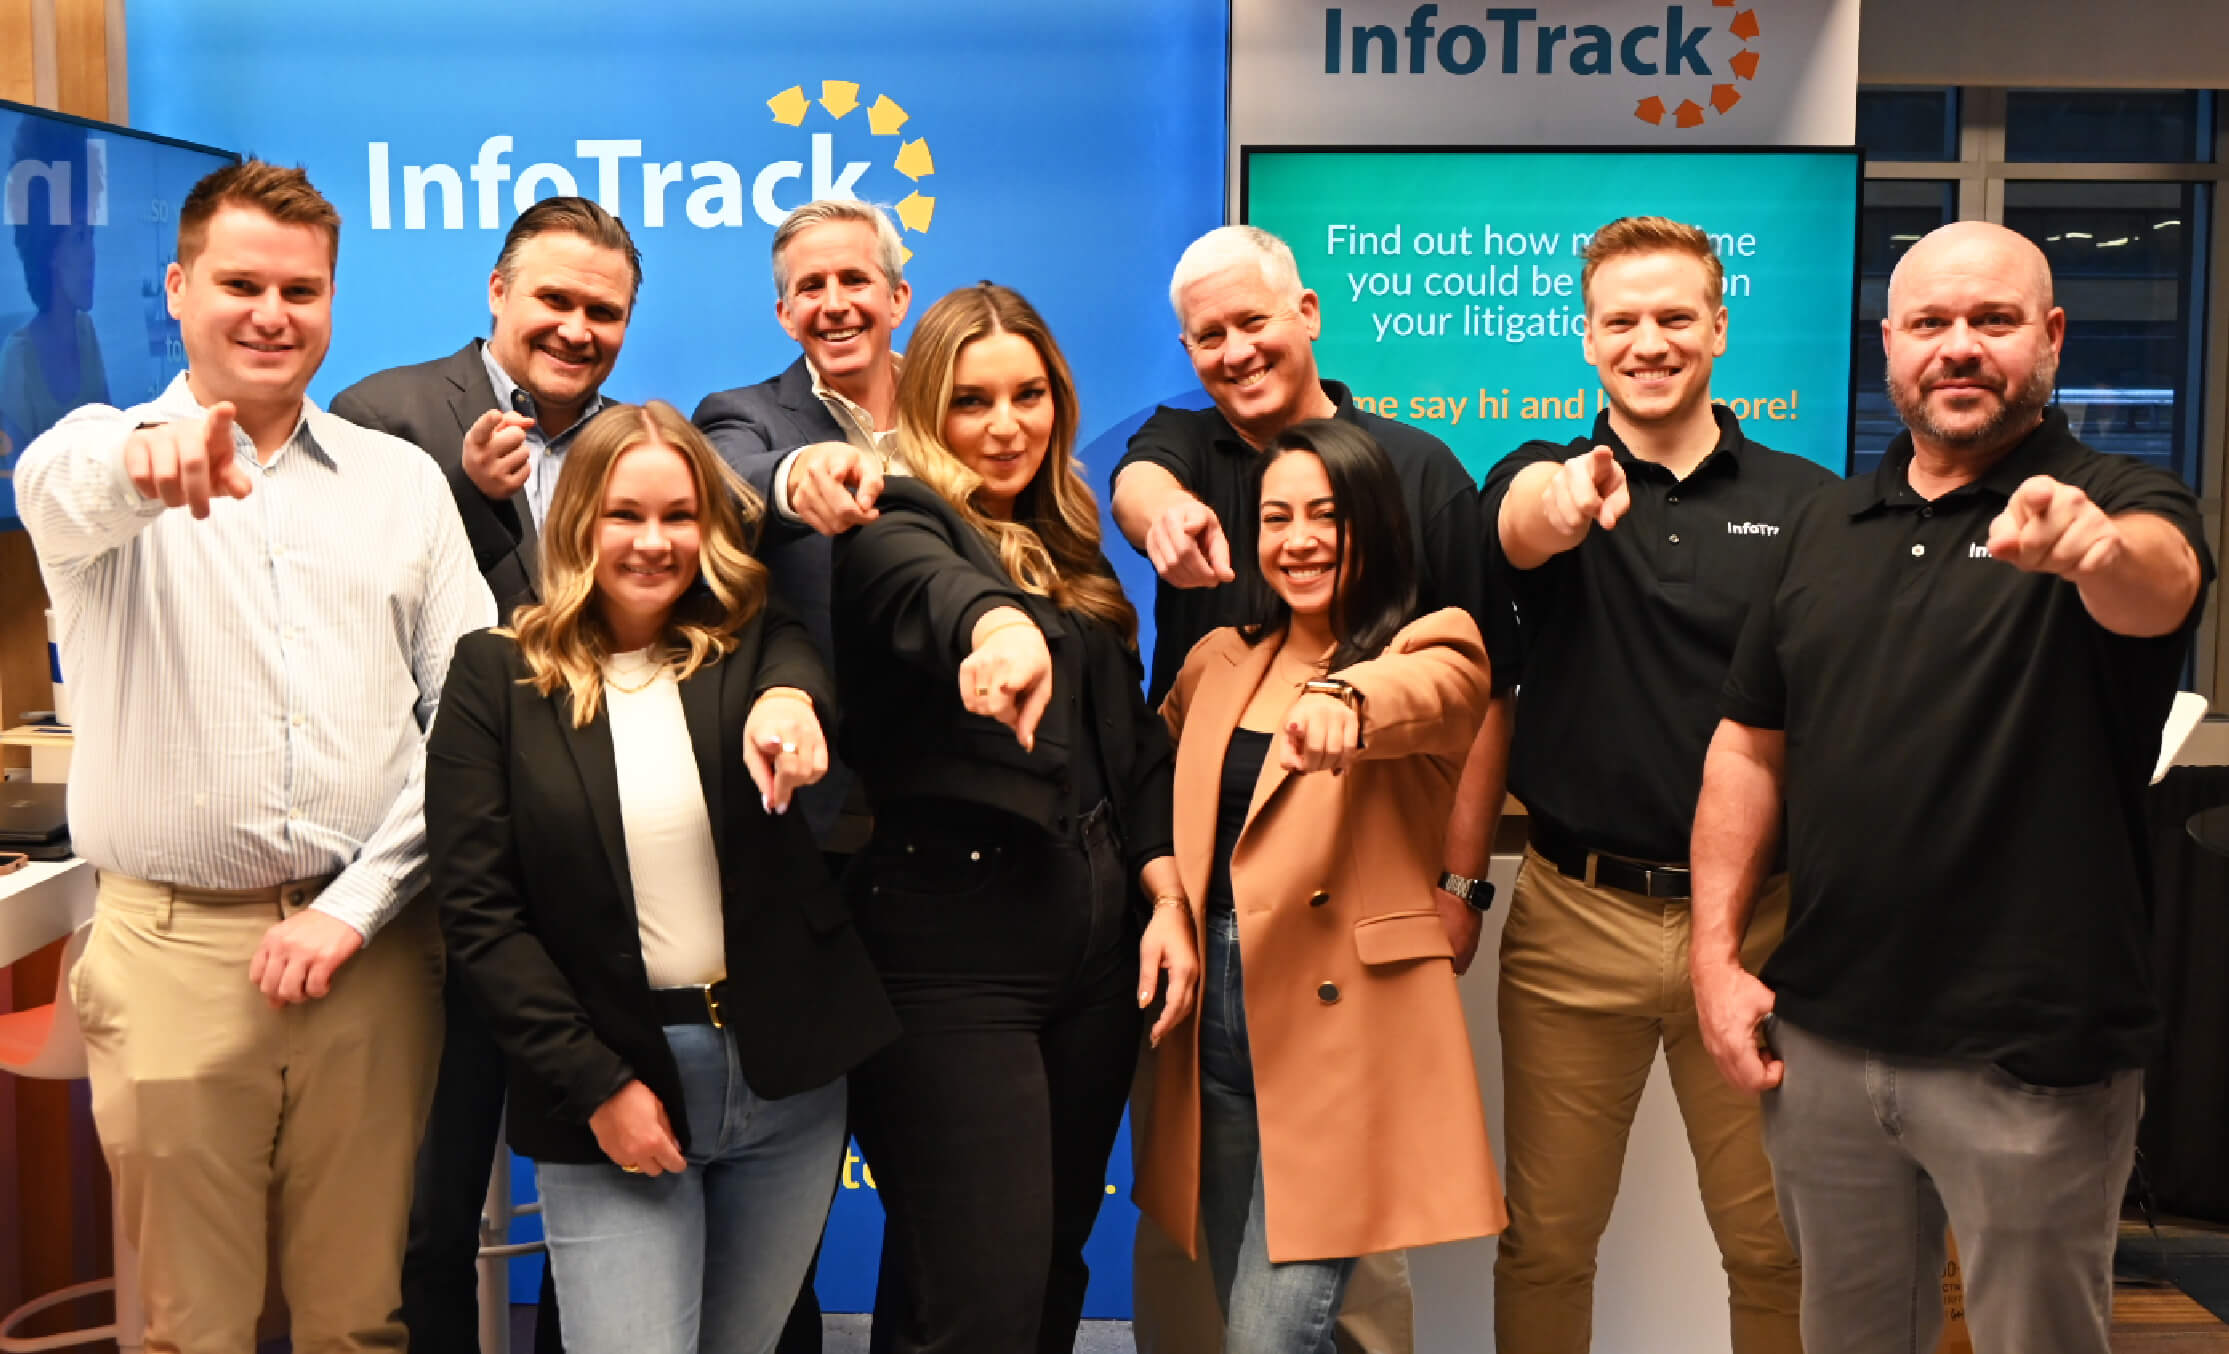 Team members in front of an InfoTrack booth at a trade show